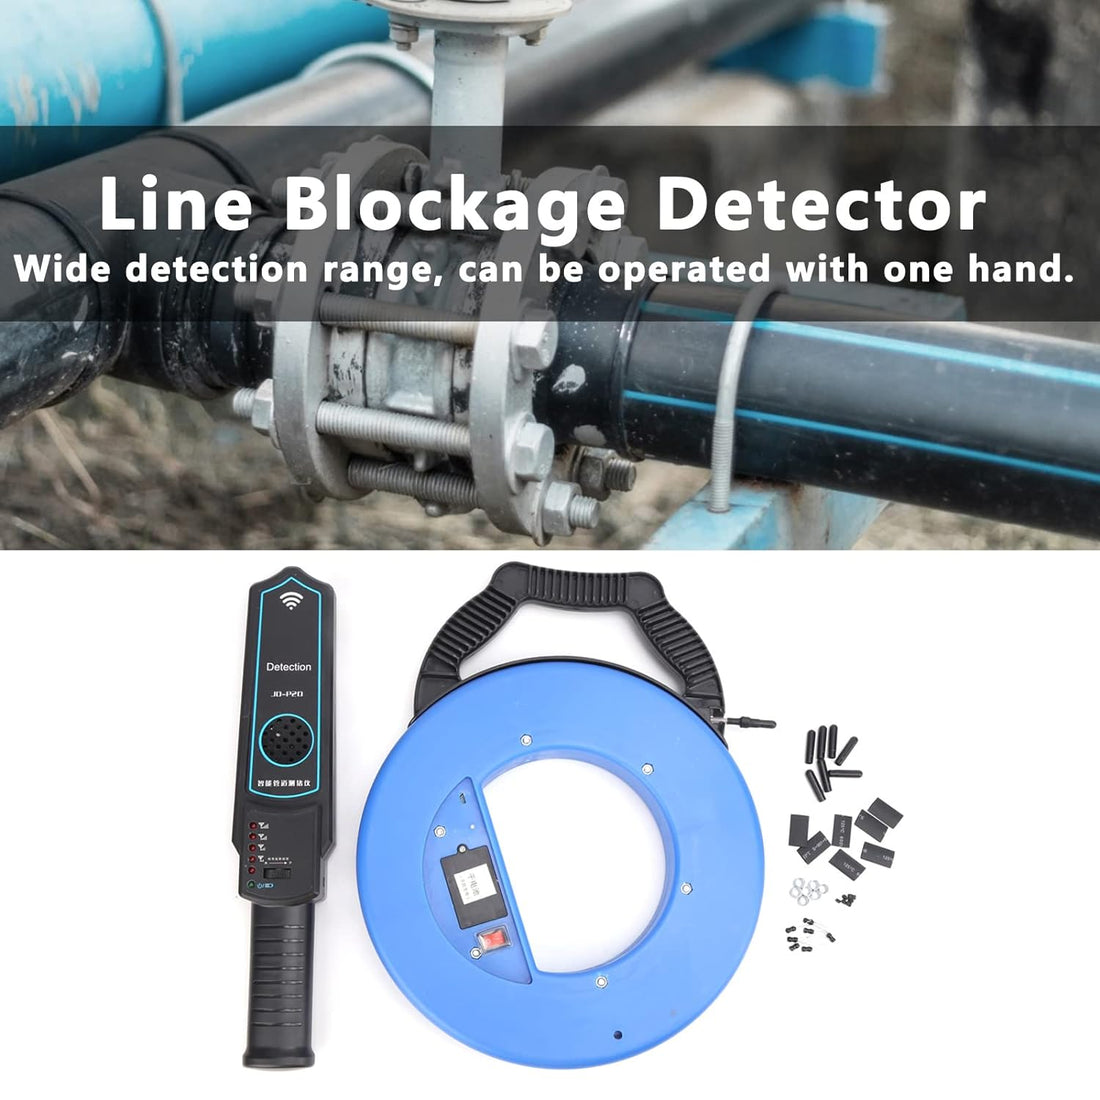 Line Blockage Detector Domestic Pipe Blockage Tester Portable Plugging Detecting Tool for Metal PVC Water Pipes (40m)